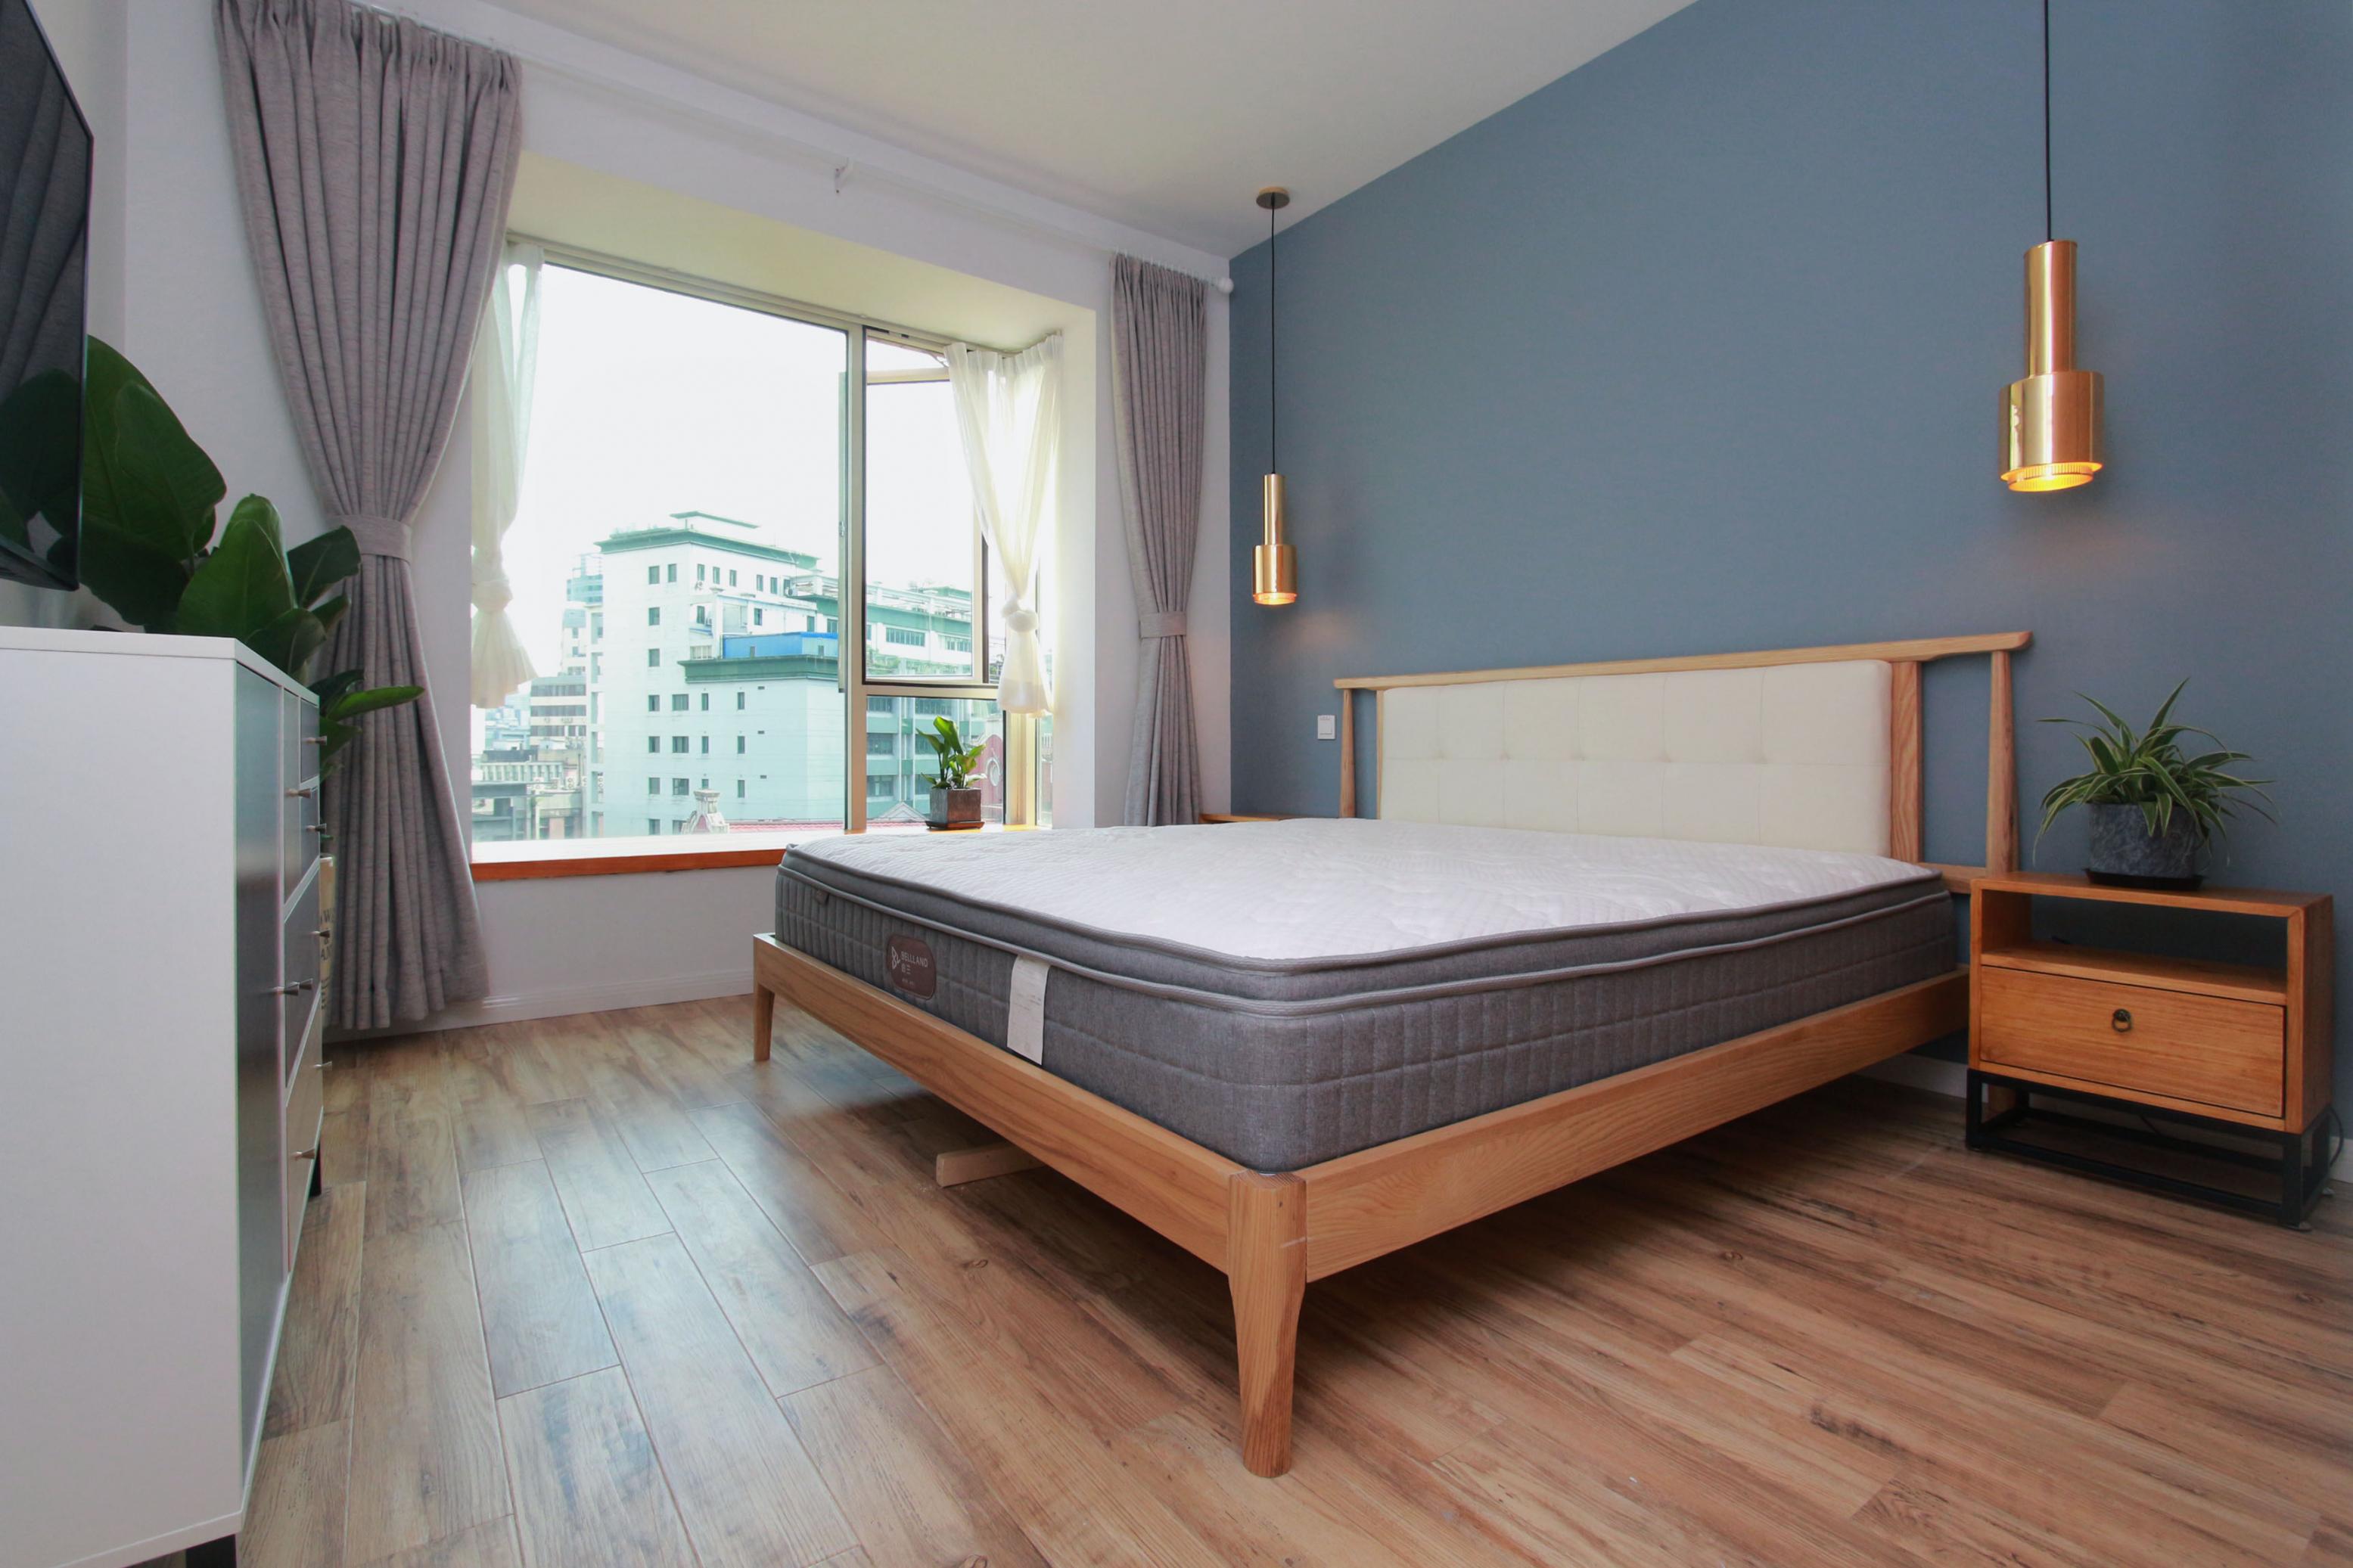 bright bedroom Renovated Modern High-end Ladoll 1BR Apt LN 2/12/13 for Rent in Shanghai